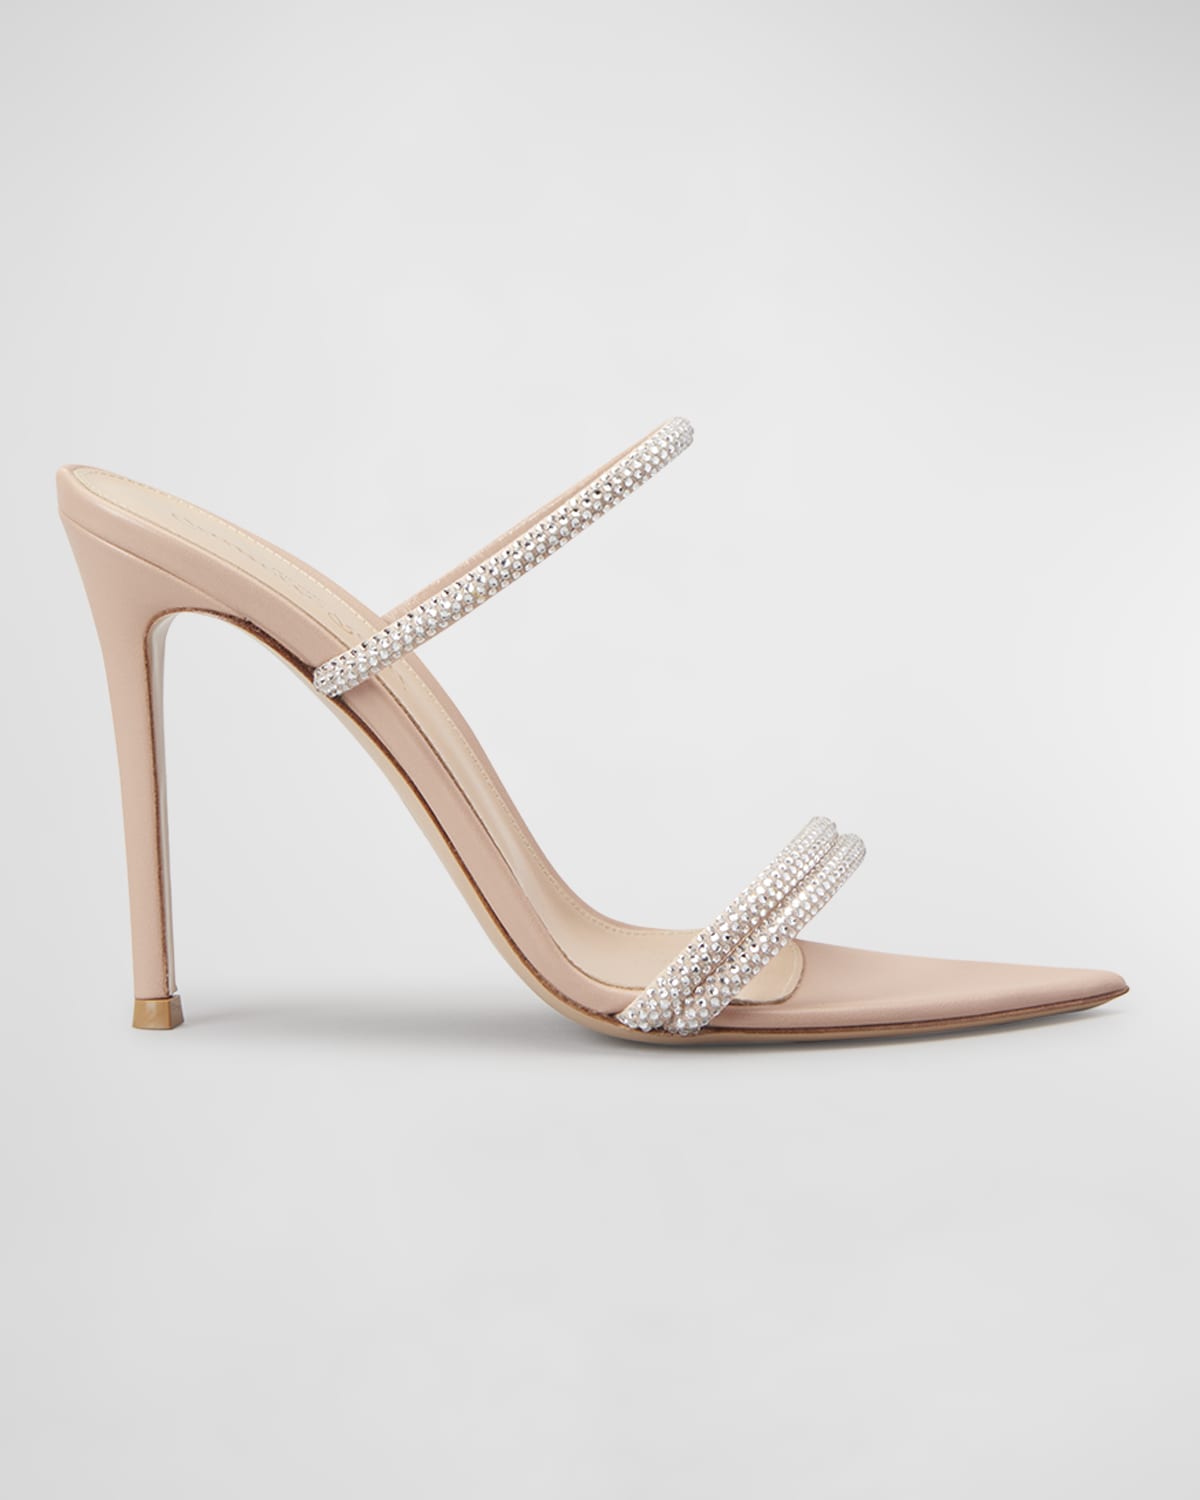 Gianvito Rossi Shoes at Neiman Marcus